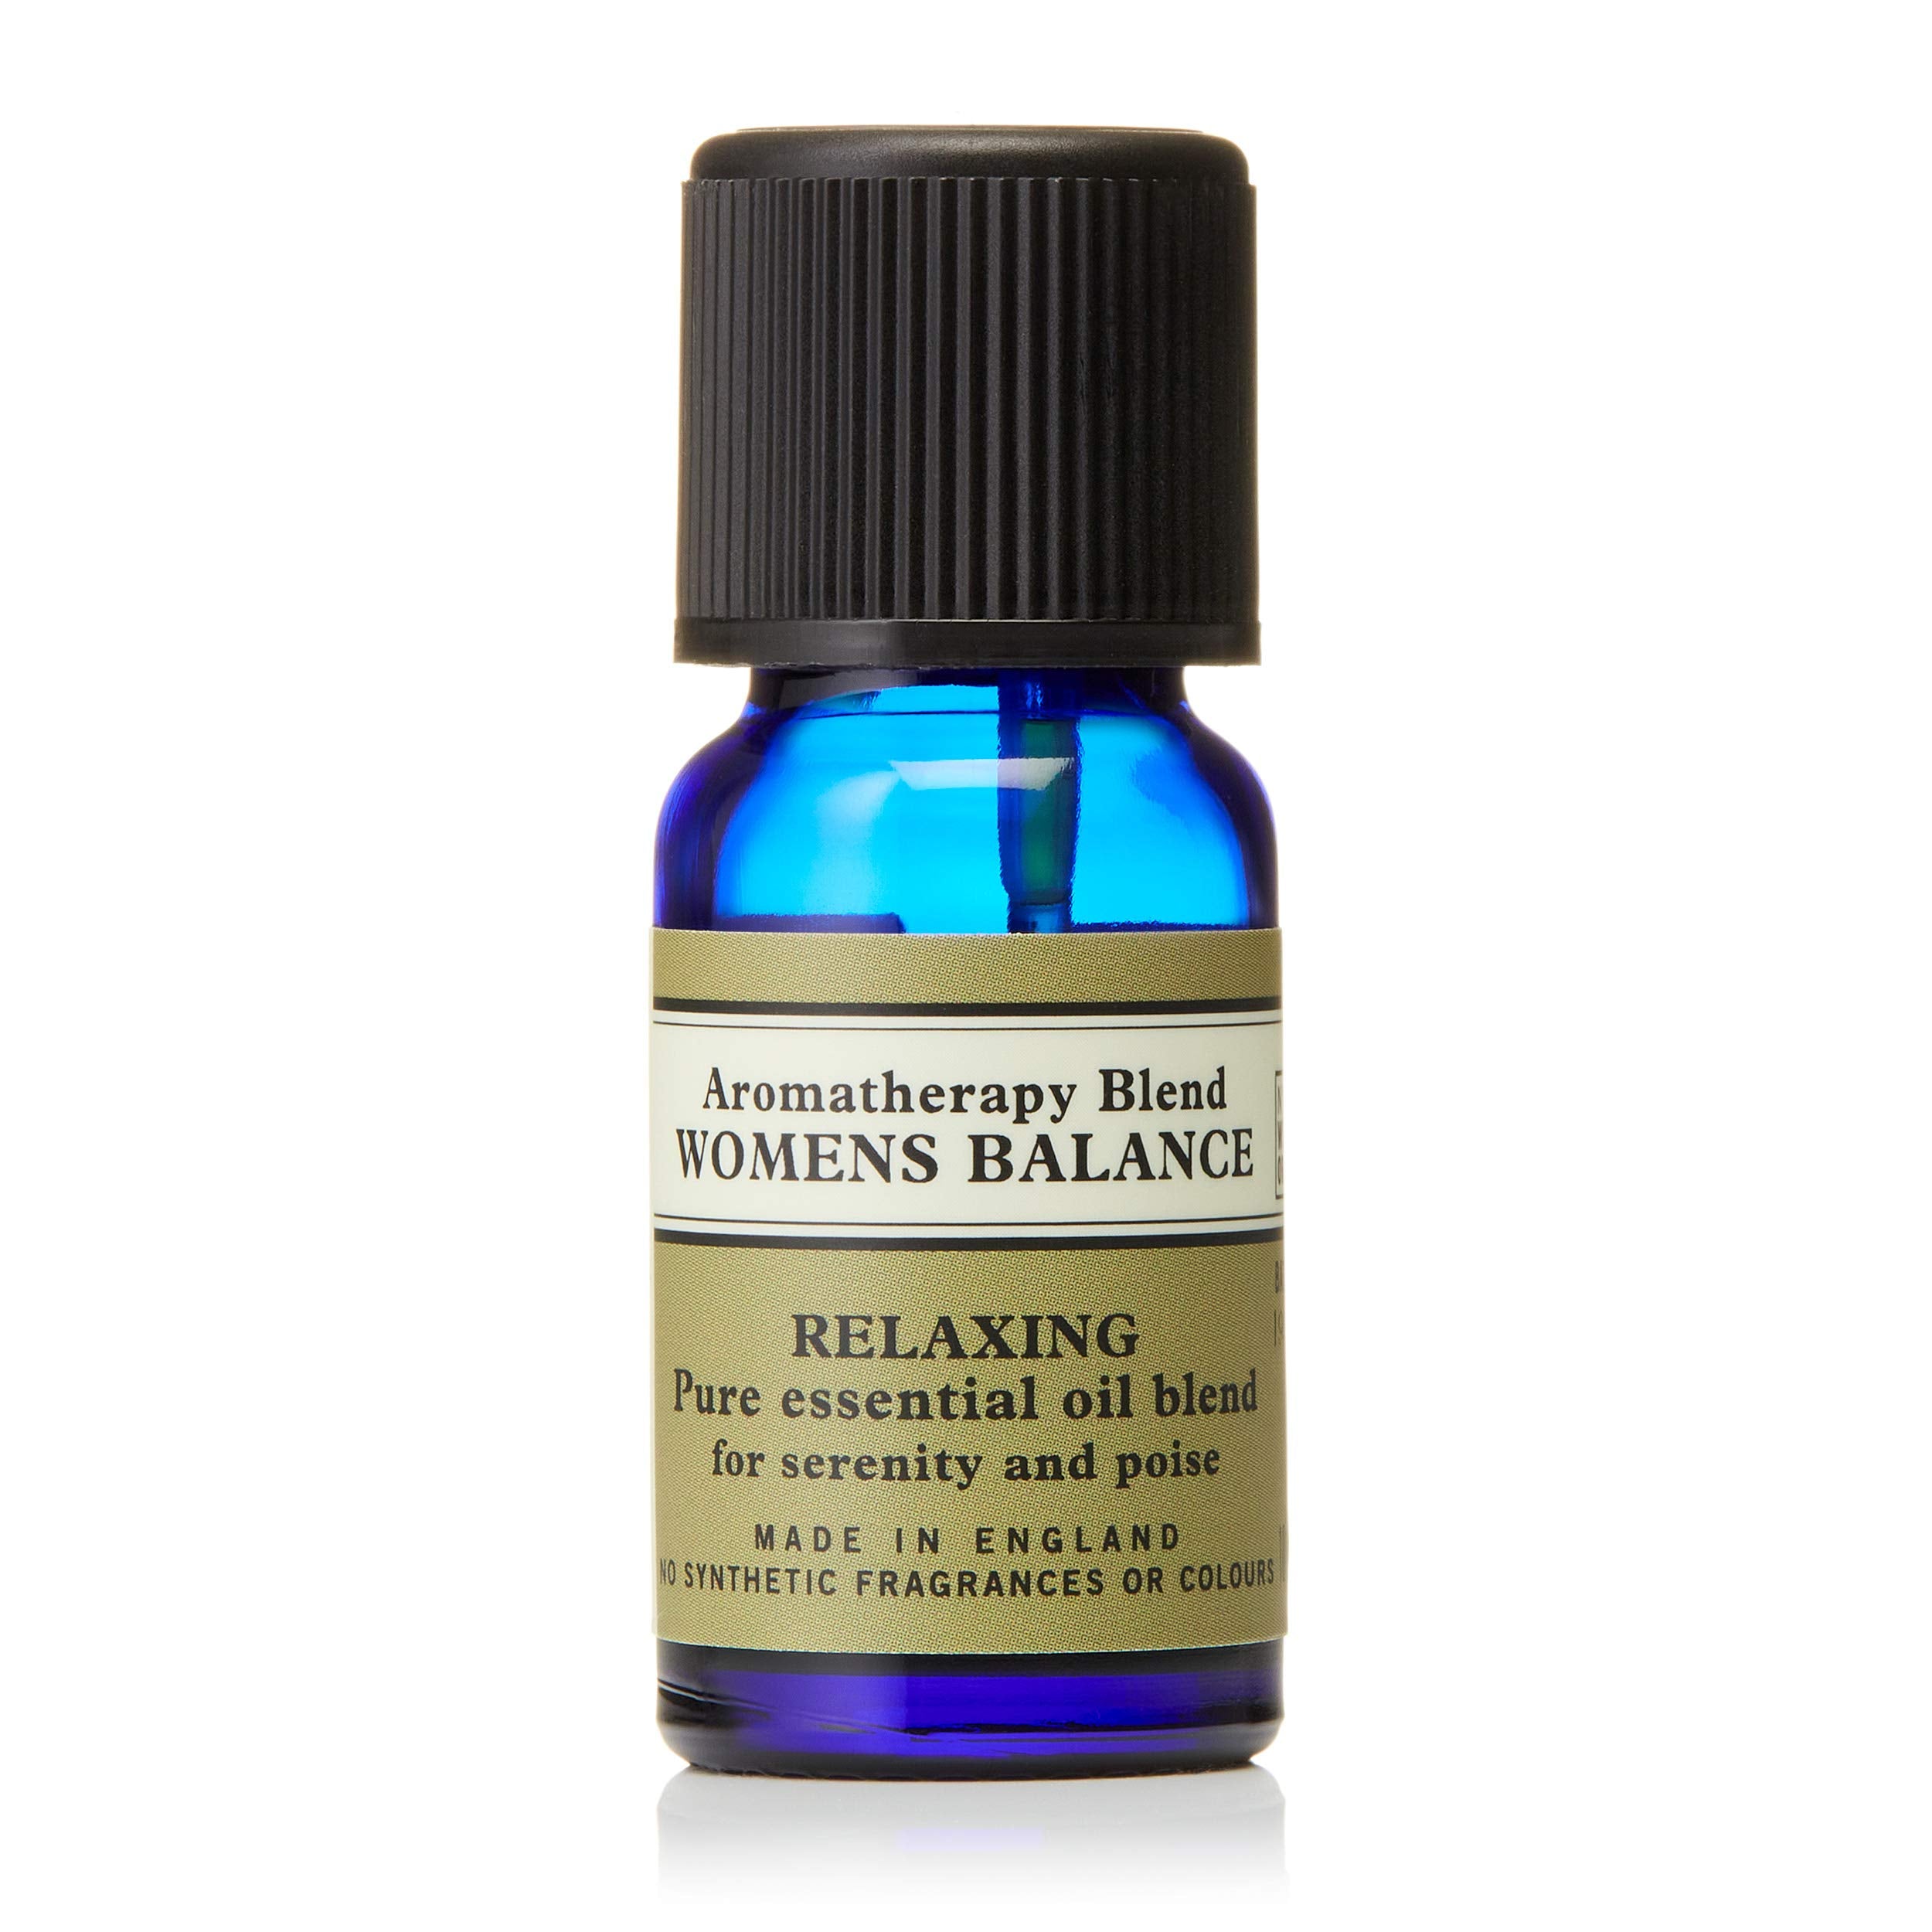 Neal's Yard Remedies Aromatherapy Blend Womens Balance | For Serenity & Poise to Calm Emotions